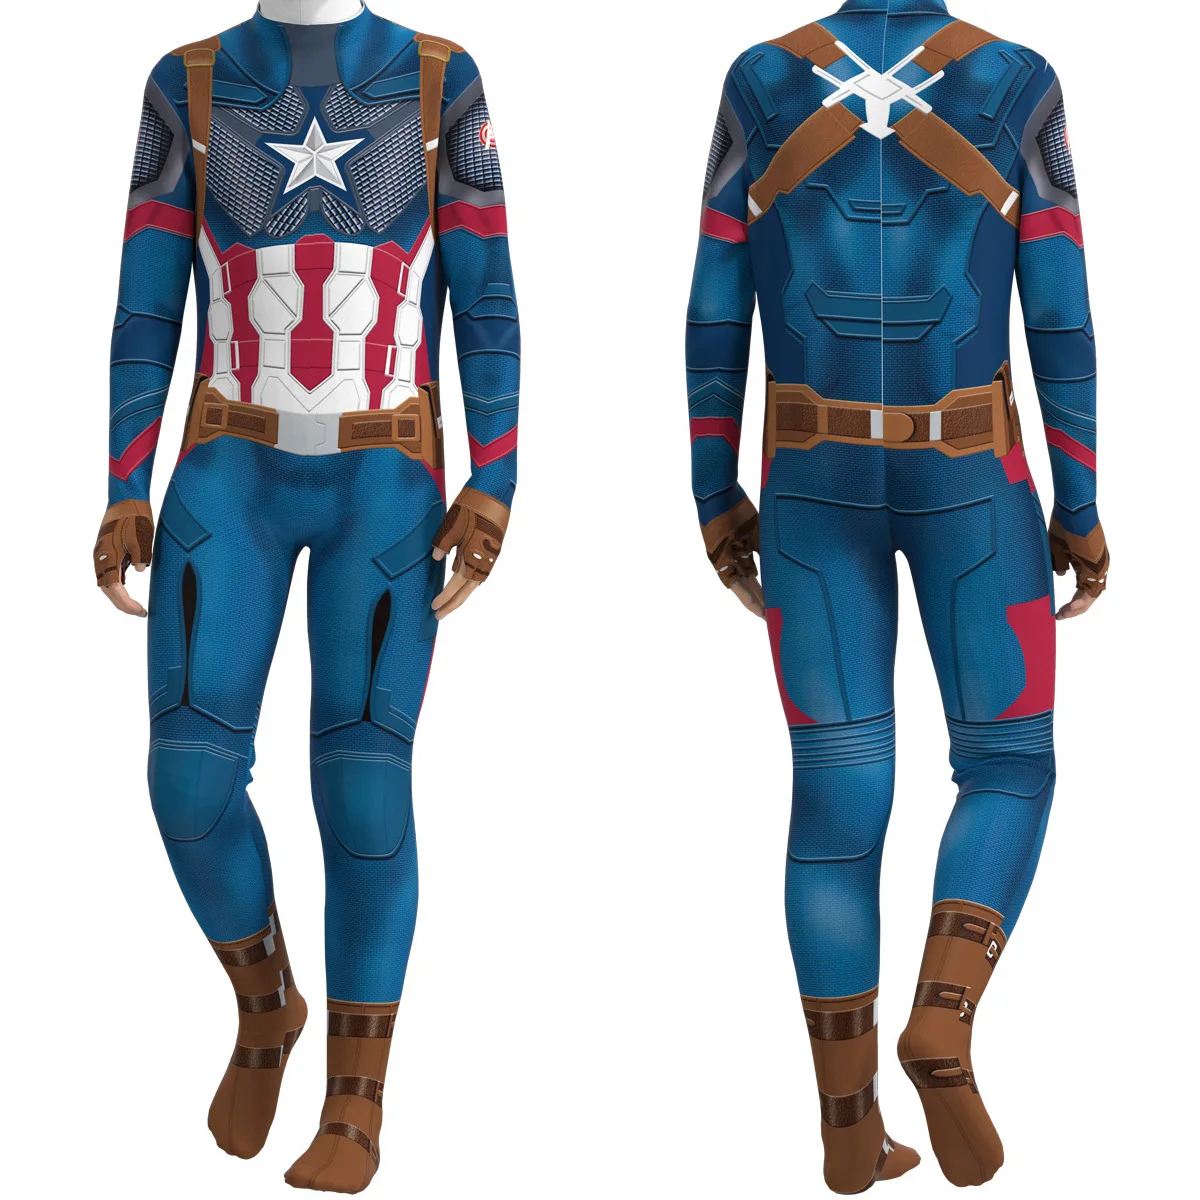 Halloween Cosplay Captain America Family Matching Clothes Superhero Muscle Costume Adult Men Kid Boys One-piece Bodysuit Outfits